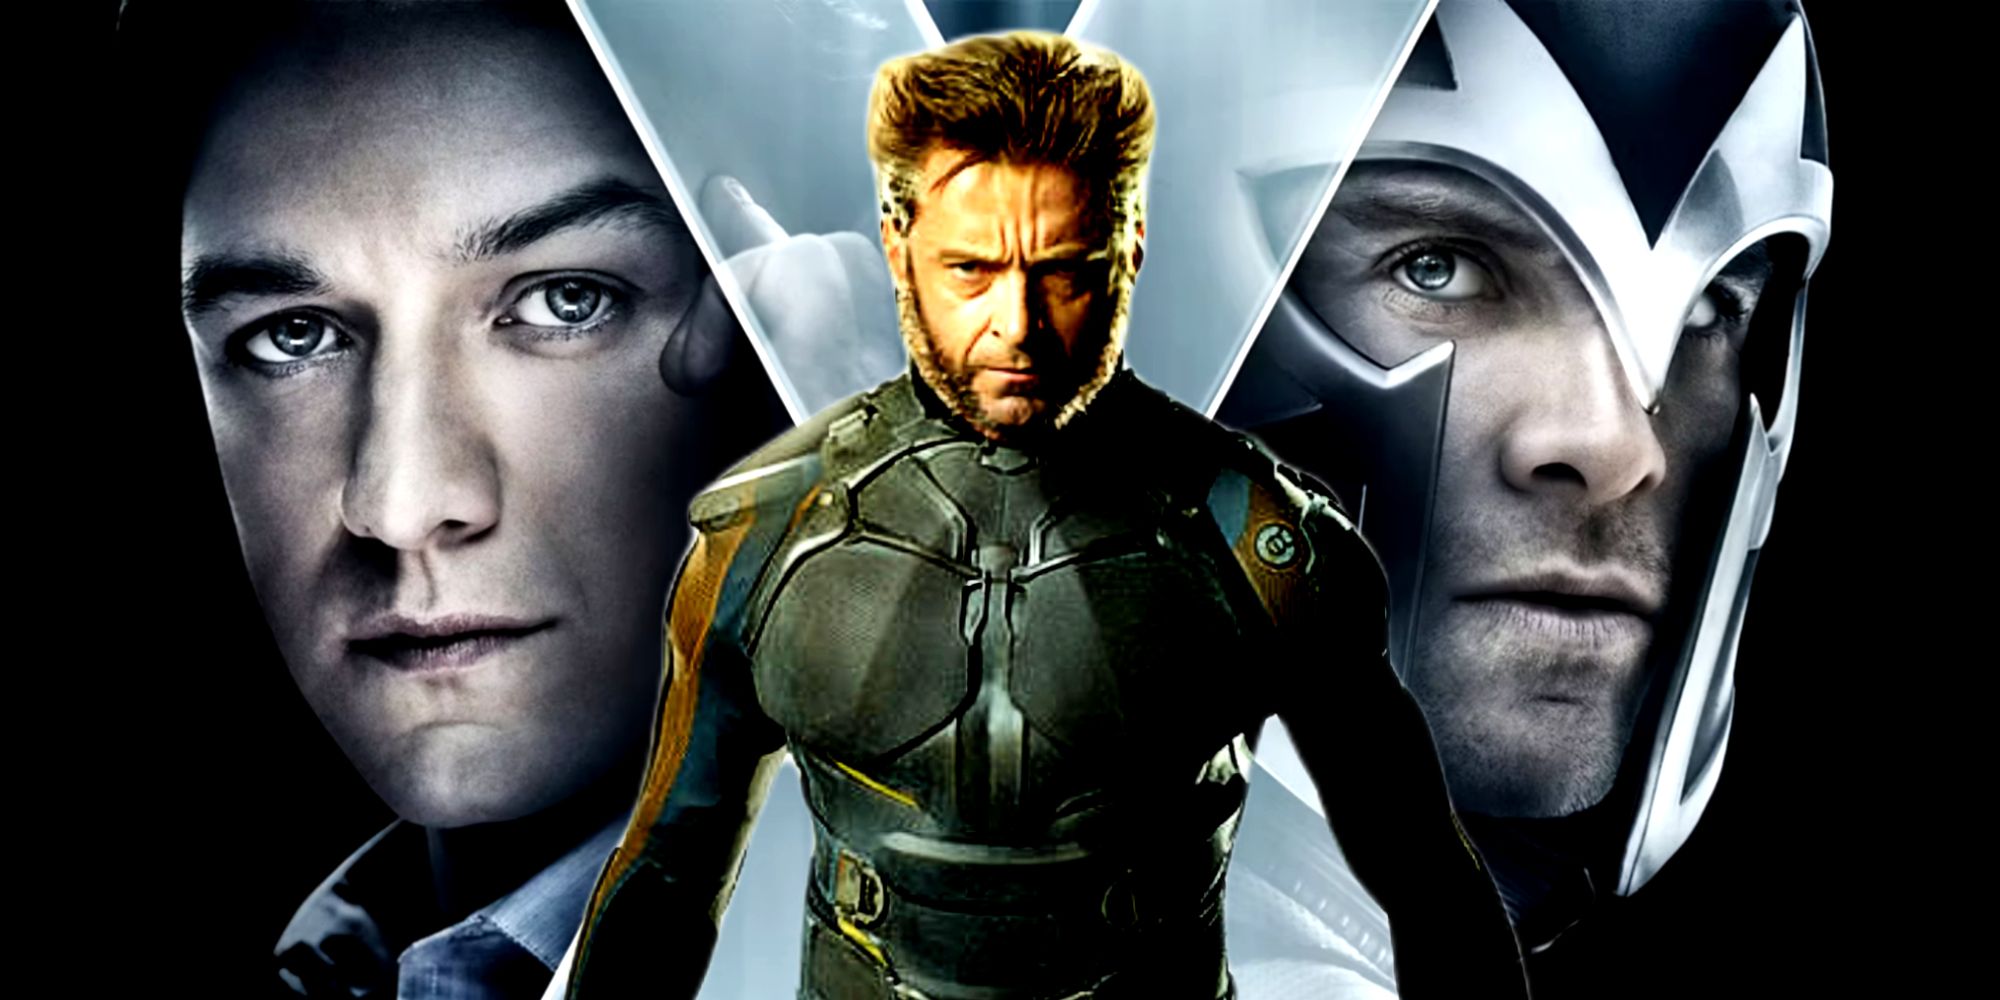 Wolverine Stands in Front of Magneto and Professor X in X-Men First Class and Days of Future Past